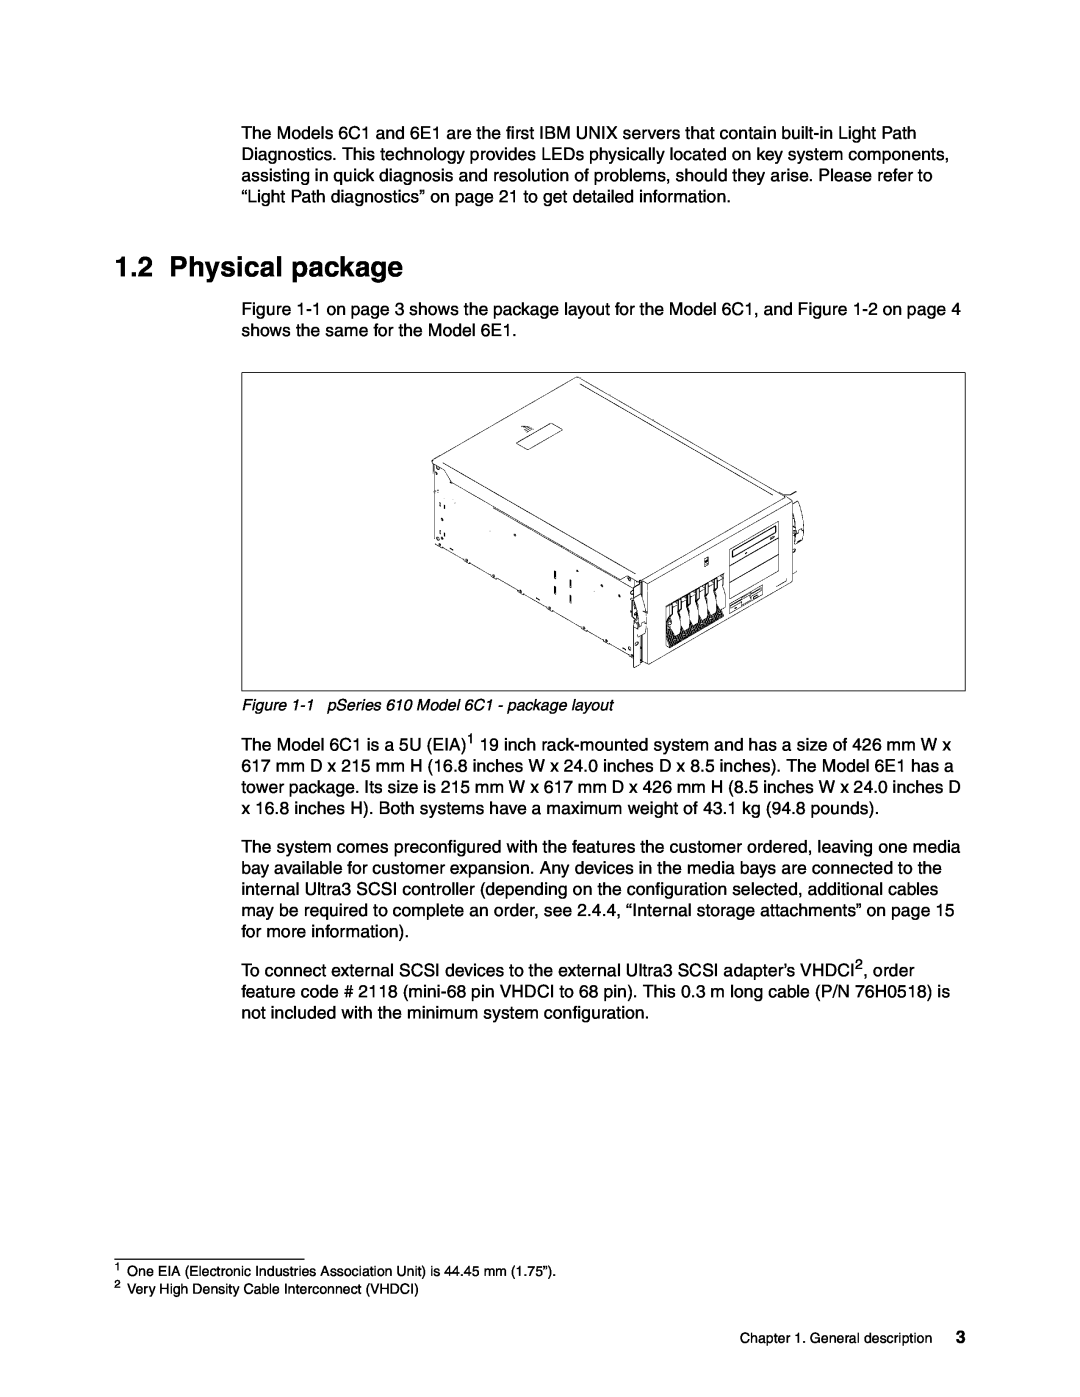 IBM 6E1 manual Physical package, 1 pSeries 610 Model 6C1 - package layout 